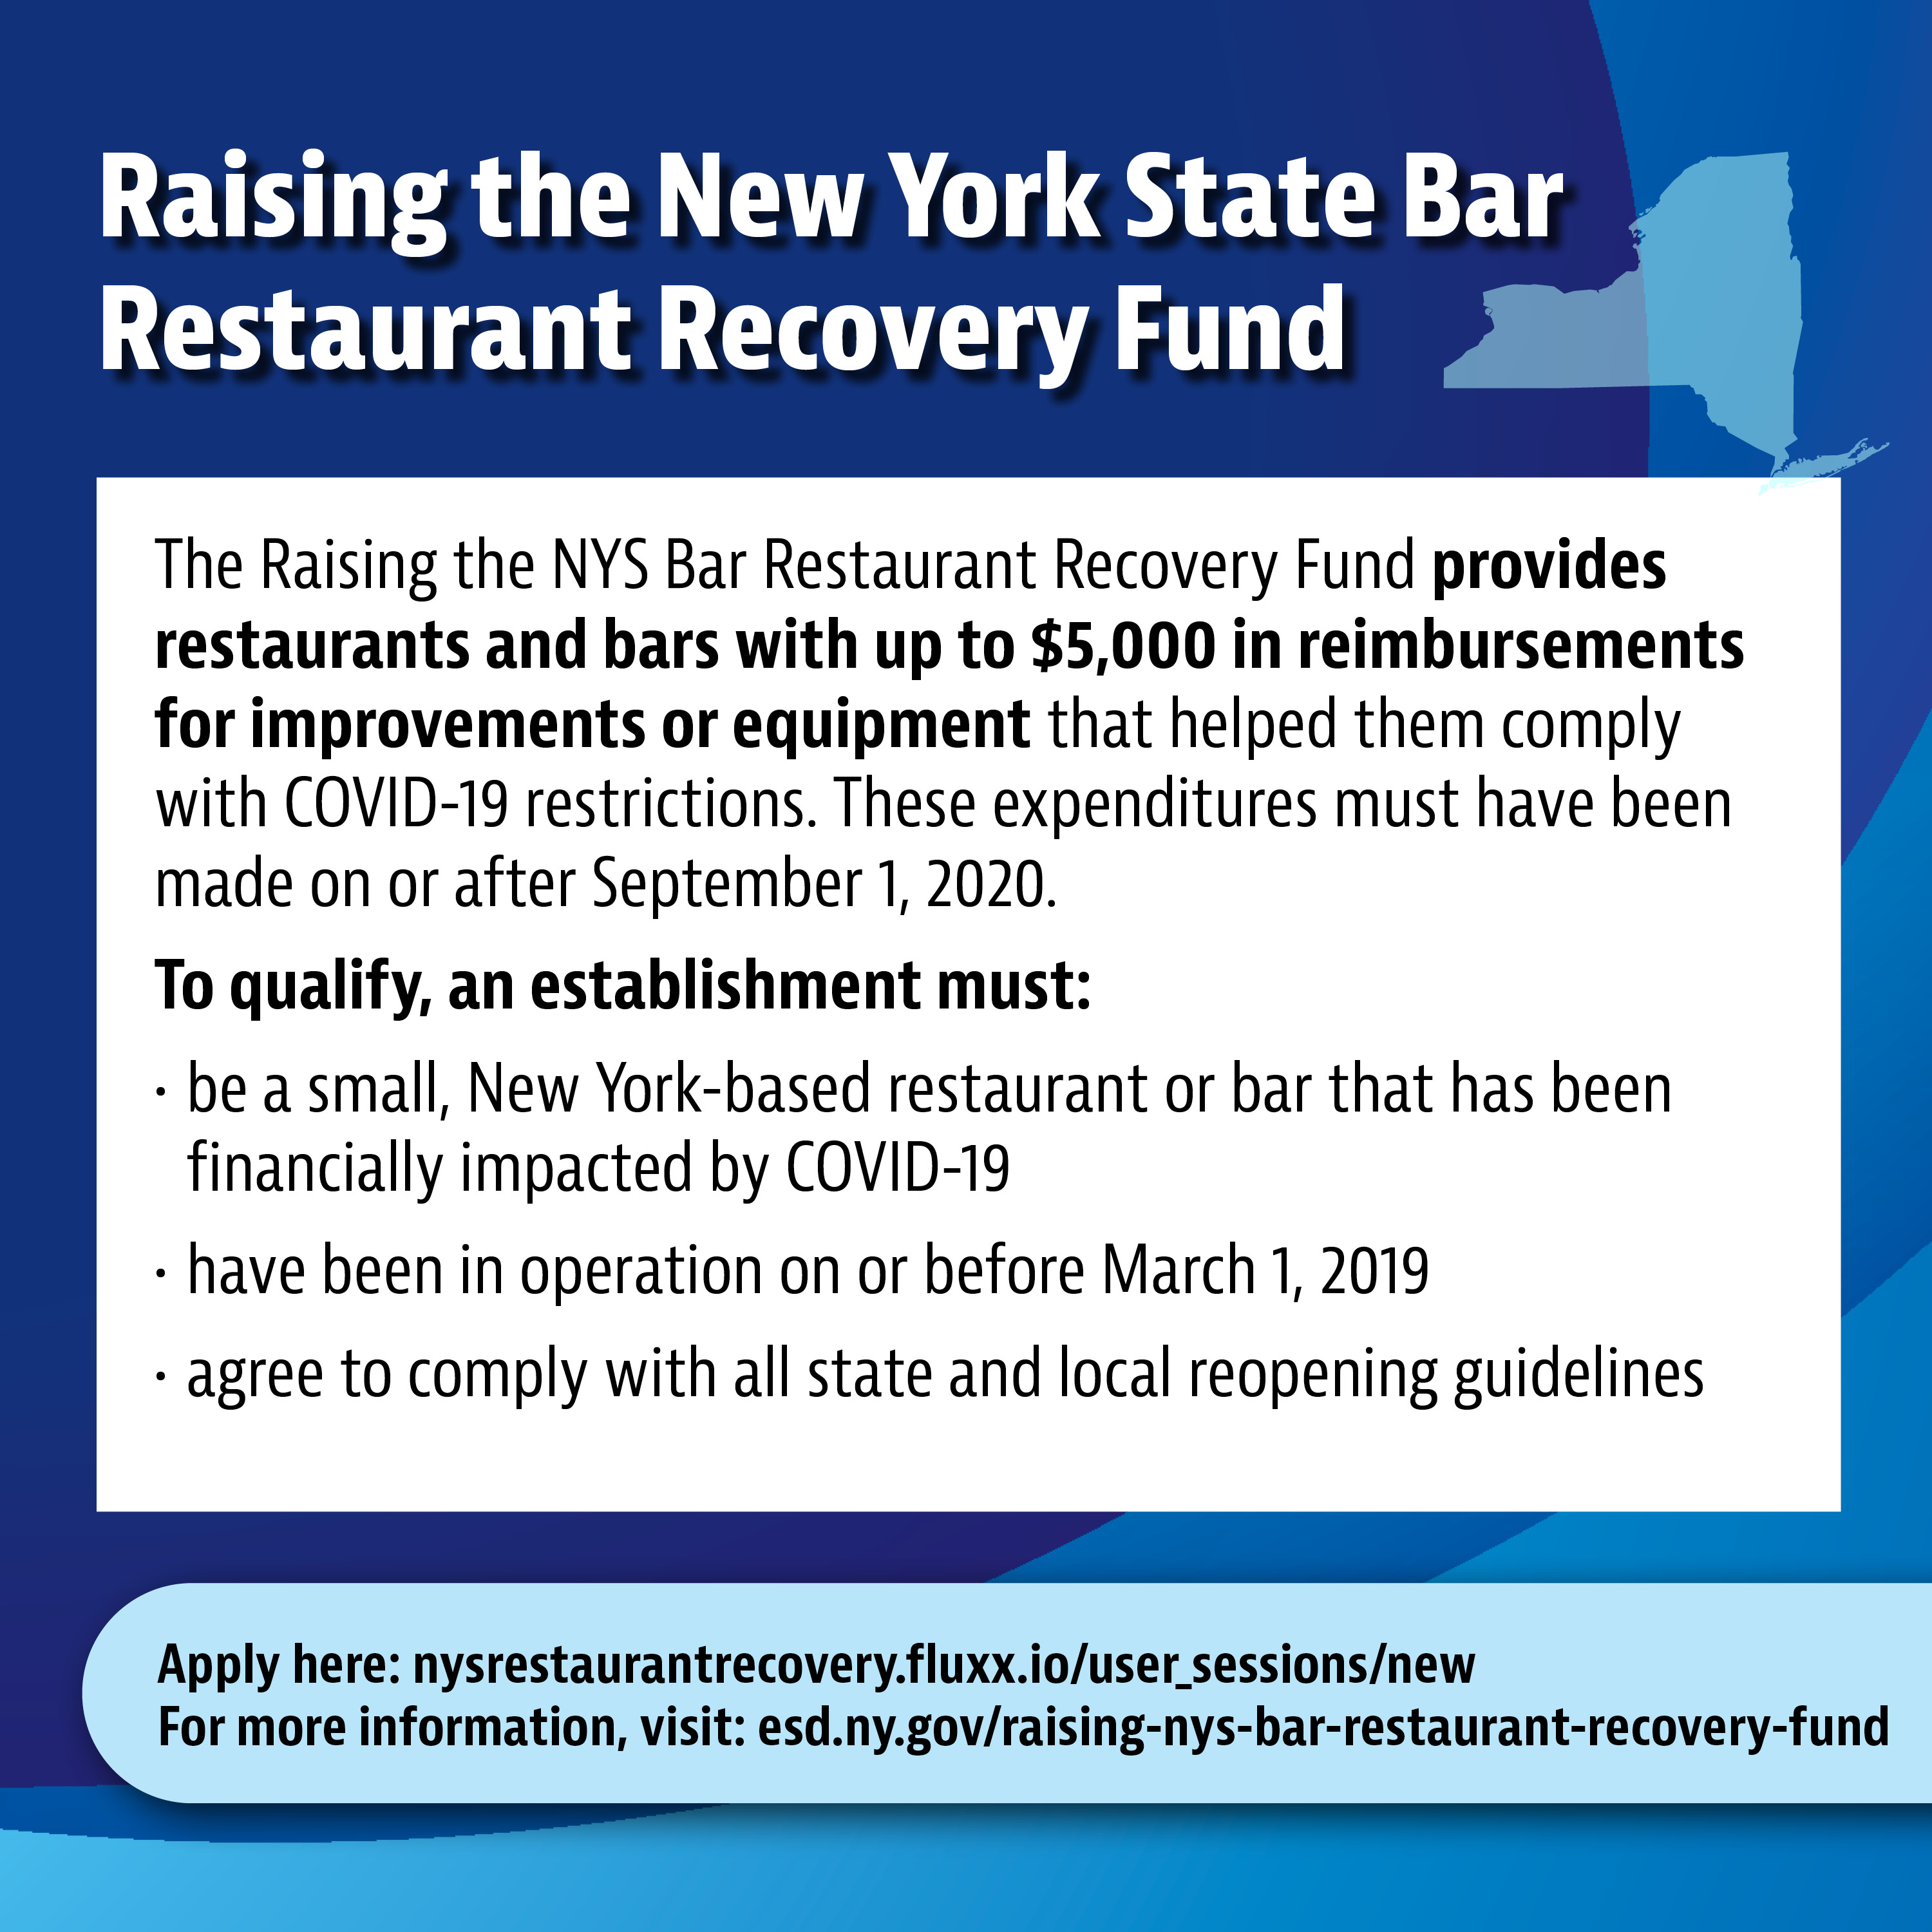 Raising NYS Restauran and Bar Recovery Fund